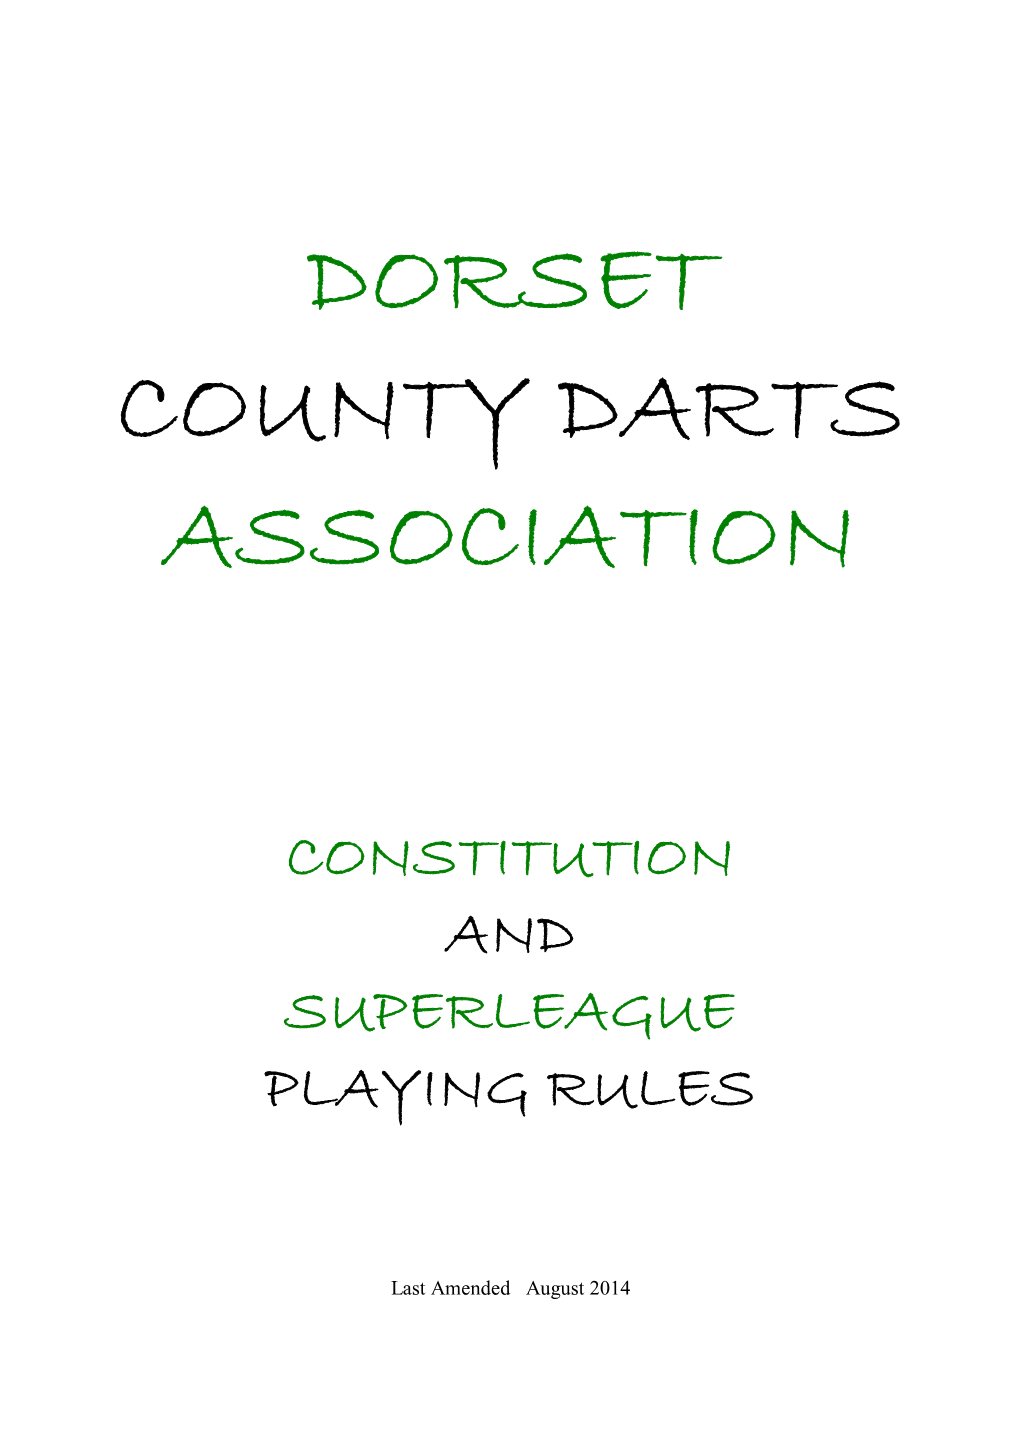 Download DCDA Constitution and Superleague Playing Rules